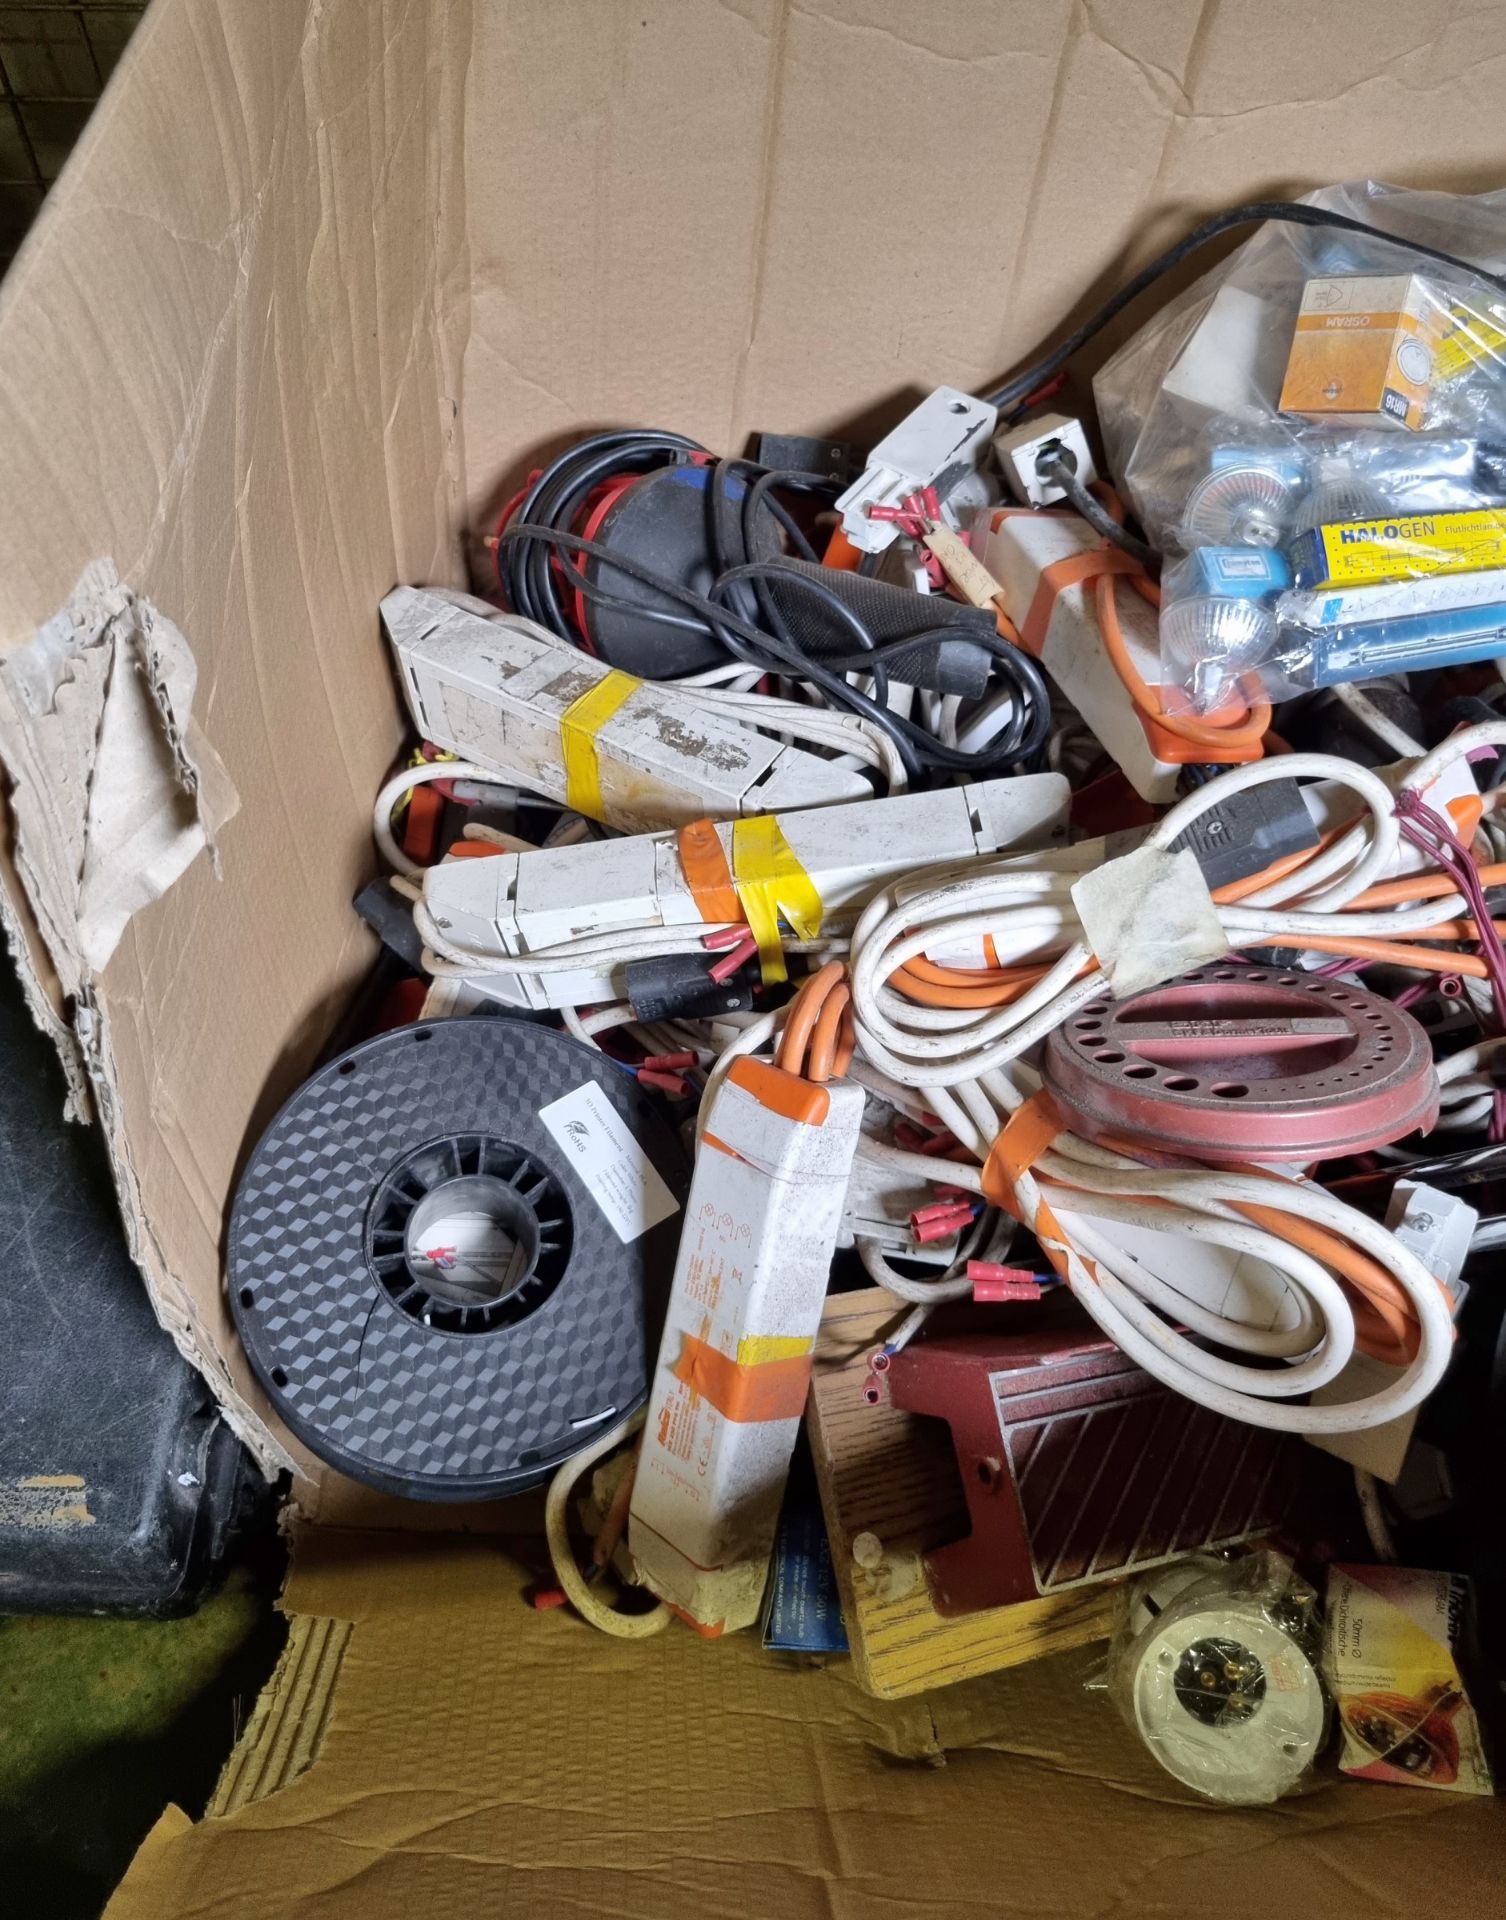 Assorted electrical components, hand tools - unknown quantity - Image 2 of 4